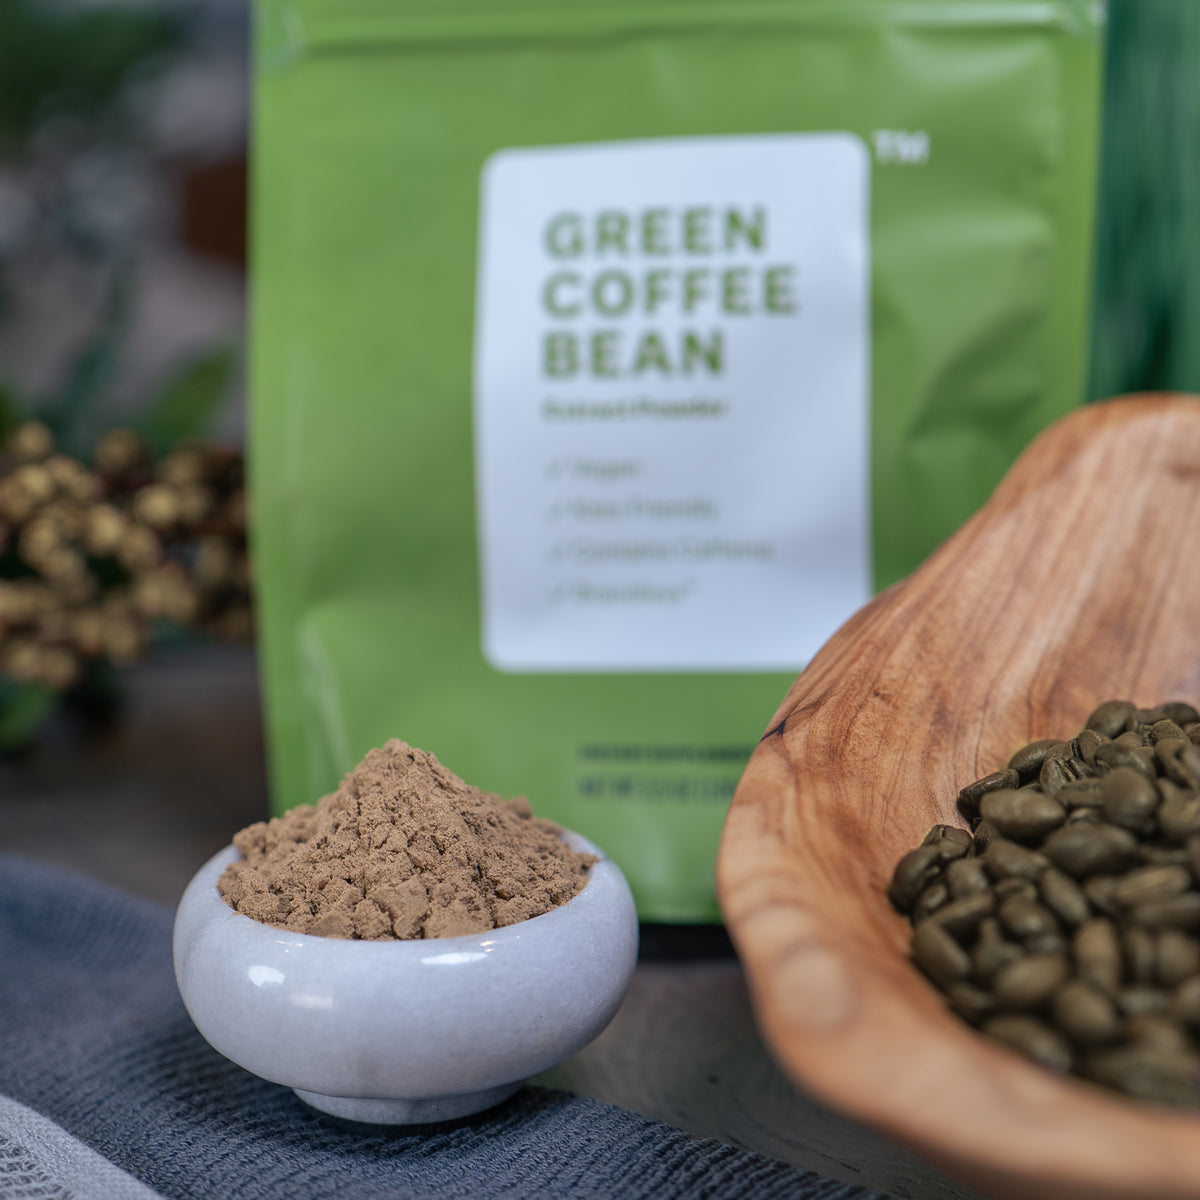 Green coffee bean extract powder in a small marble bowl in front of the product bag, with whole green coffee beans in a wood container to the side.